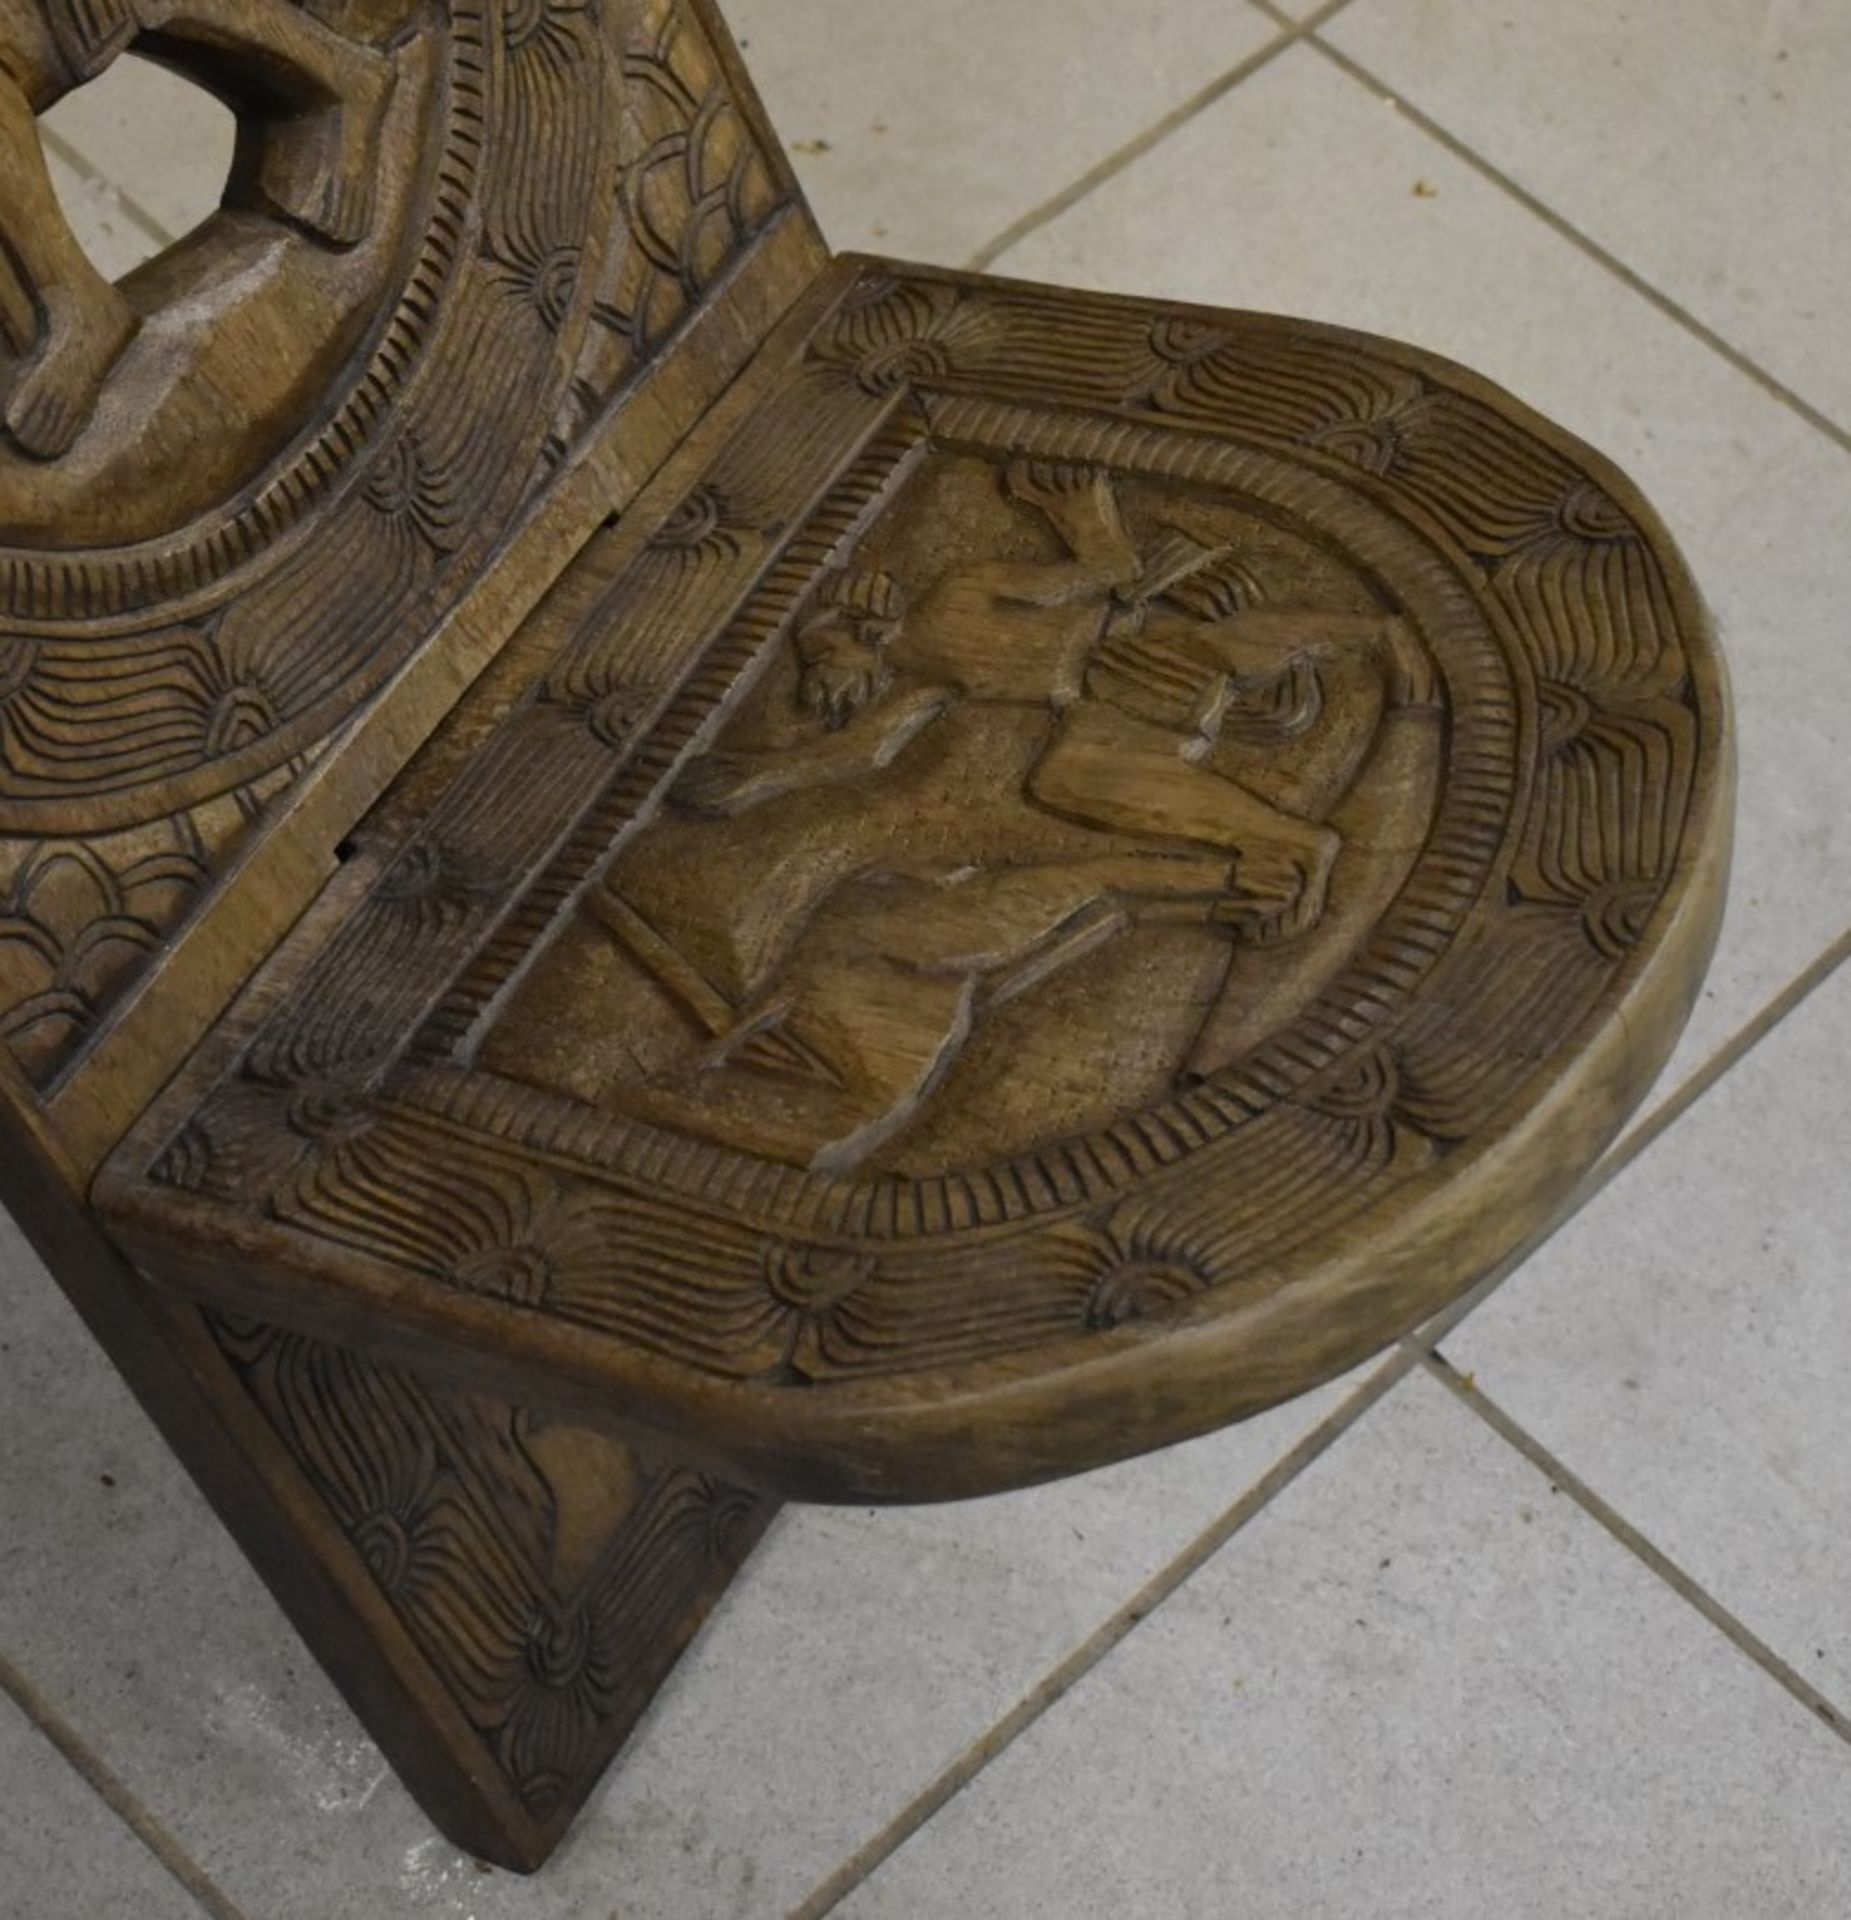 1 x Vintage Hand Carved African Hardwood Chair - From an Exclusive Hale Property - Image 2 of 4